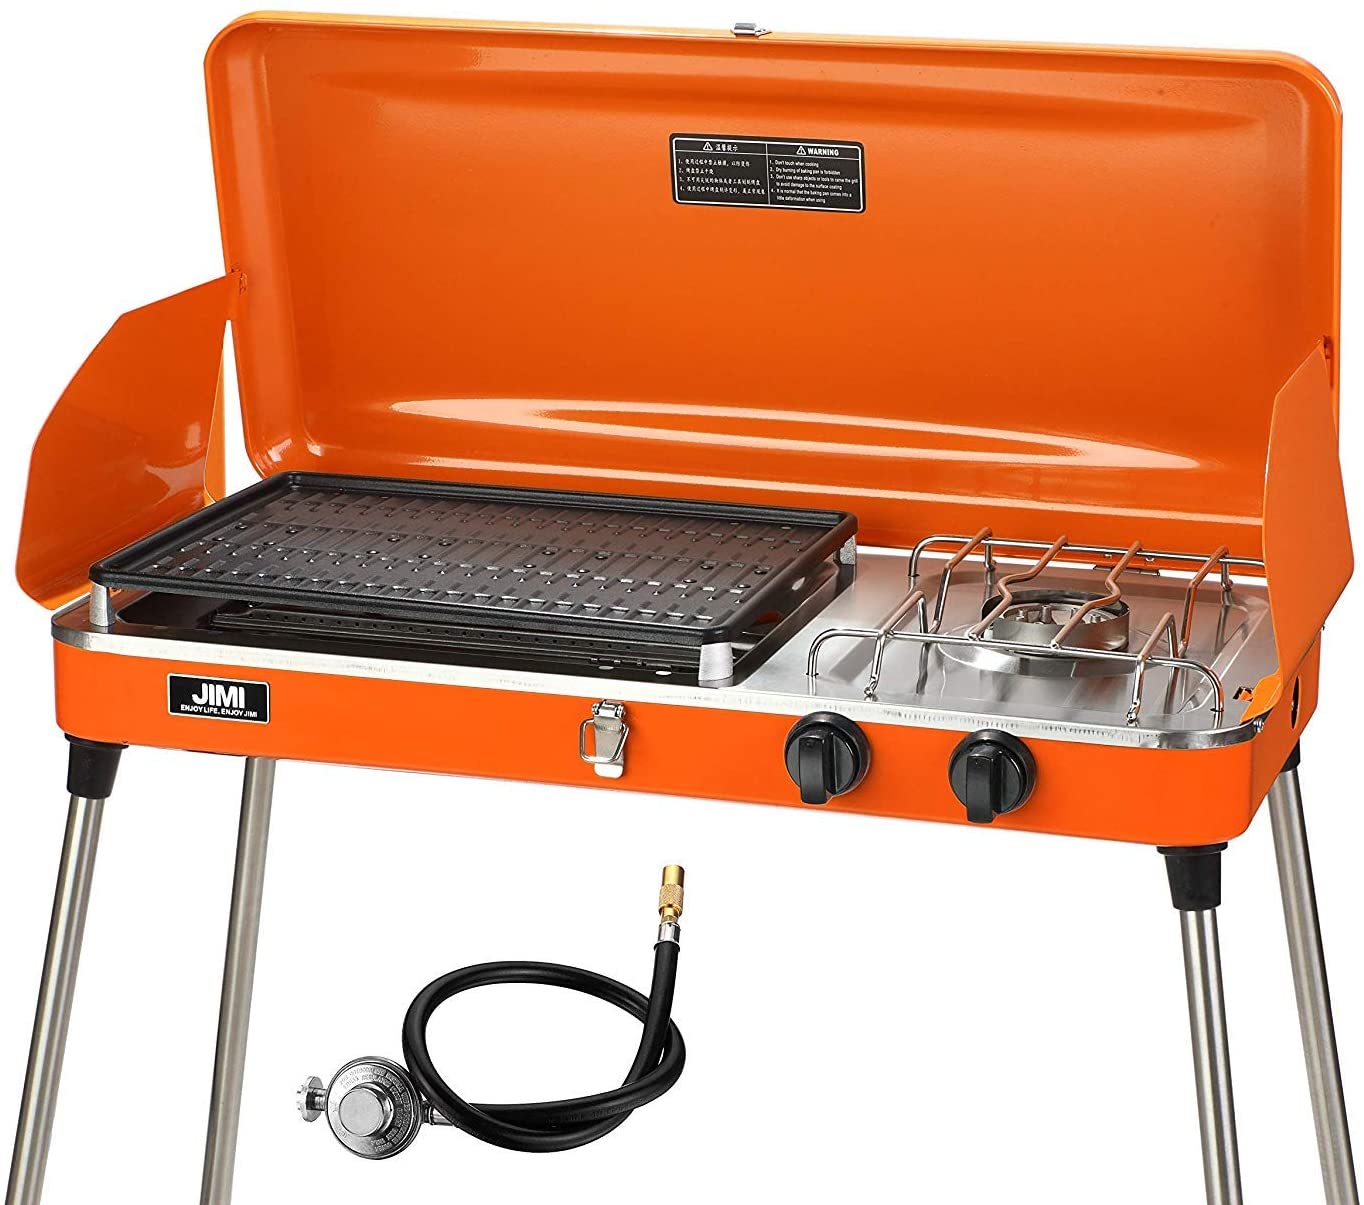  2 Burner Gas Stove With Grill for Simple Design